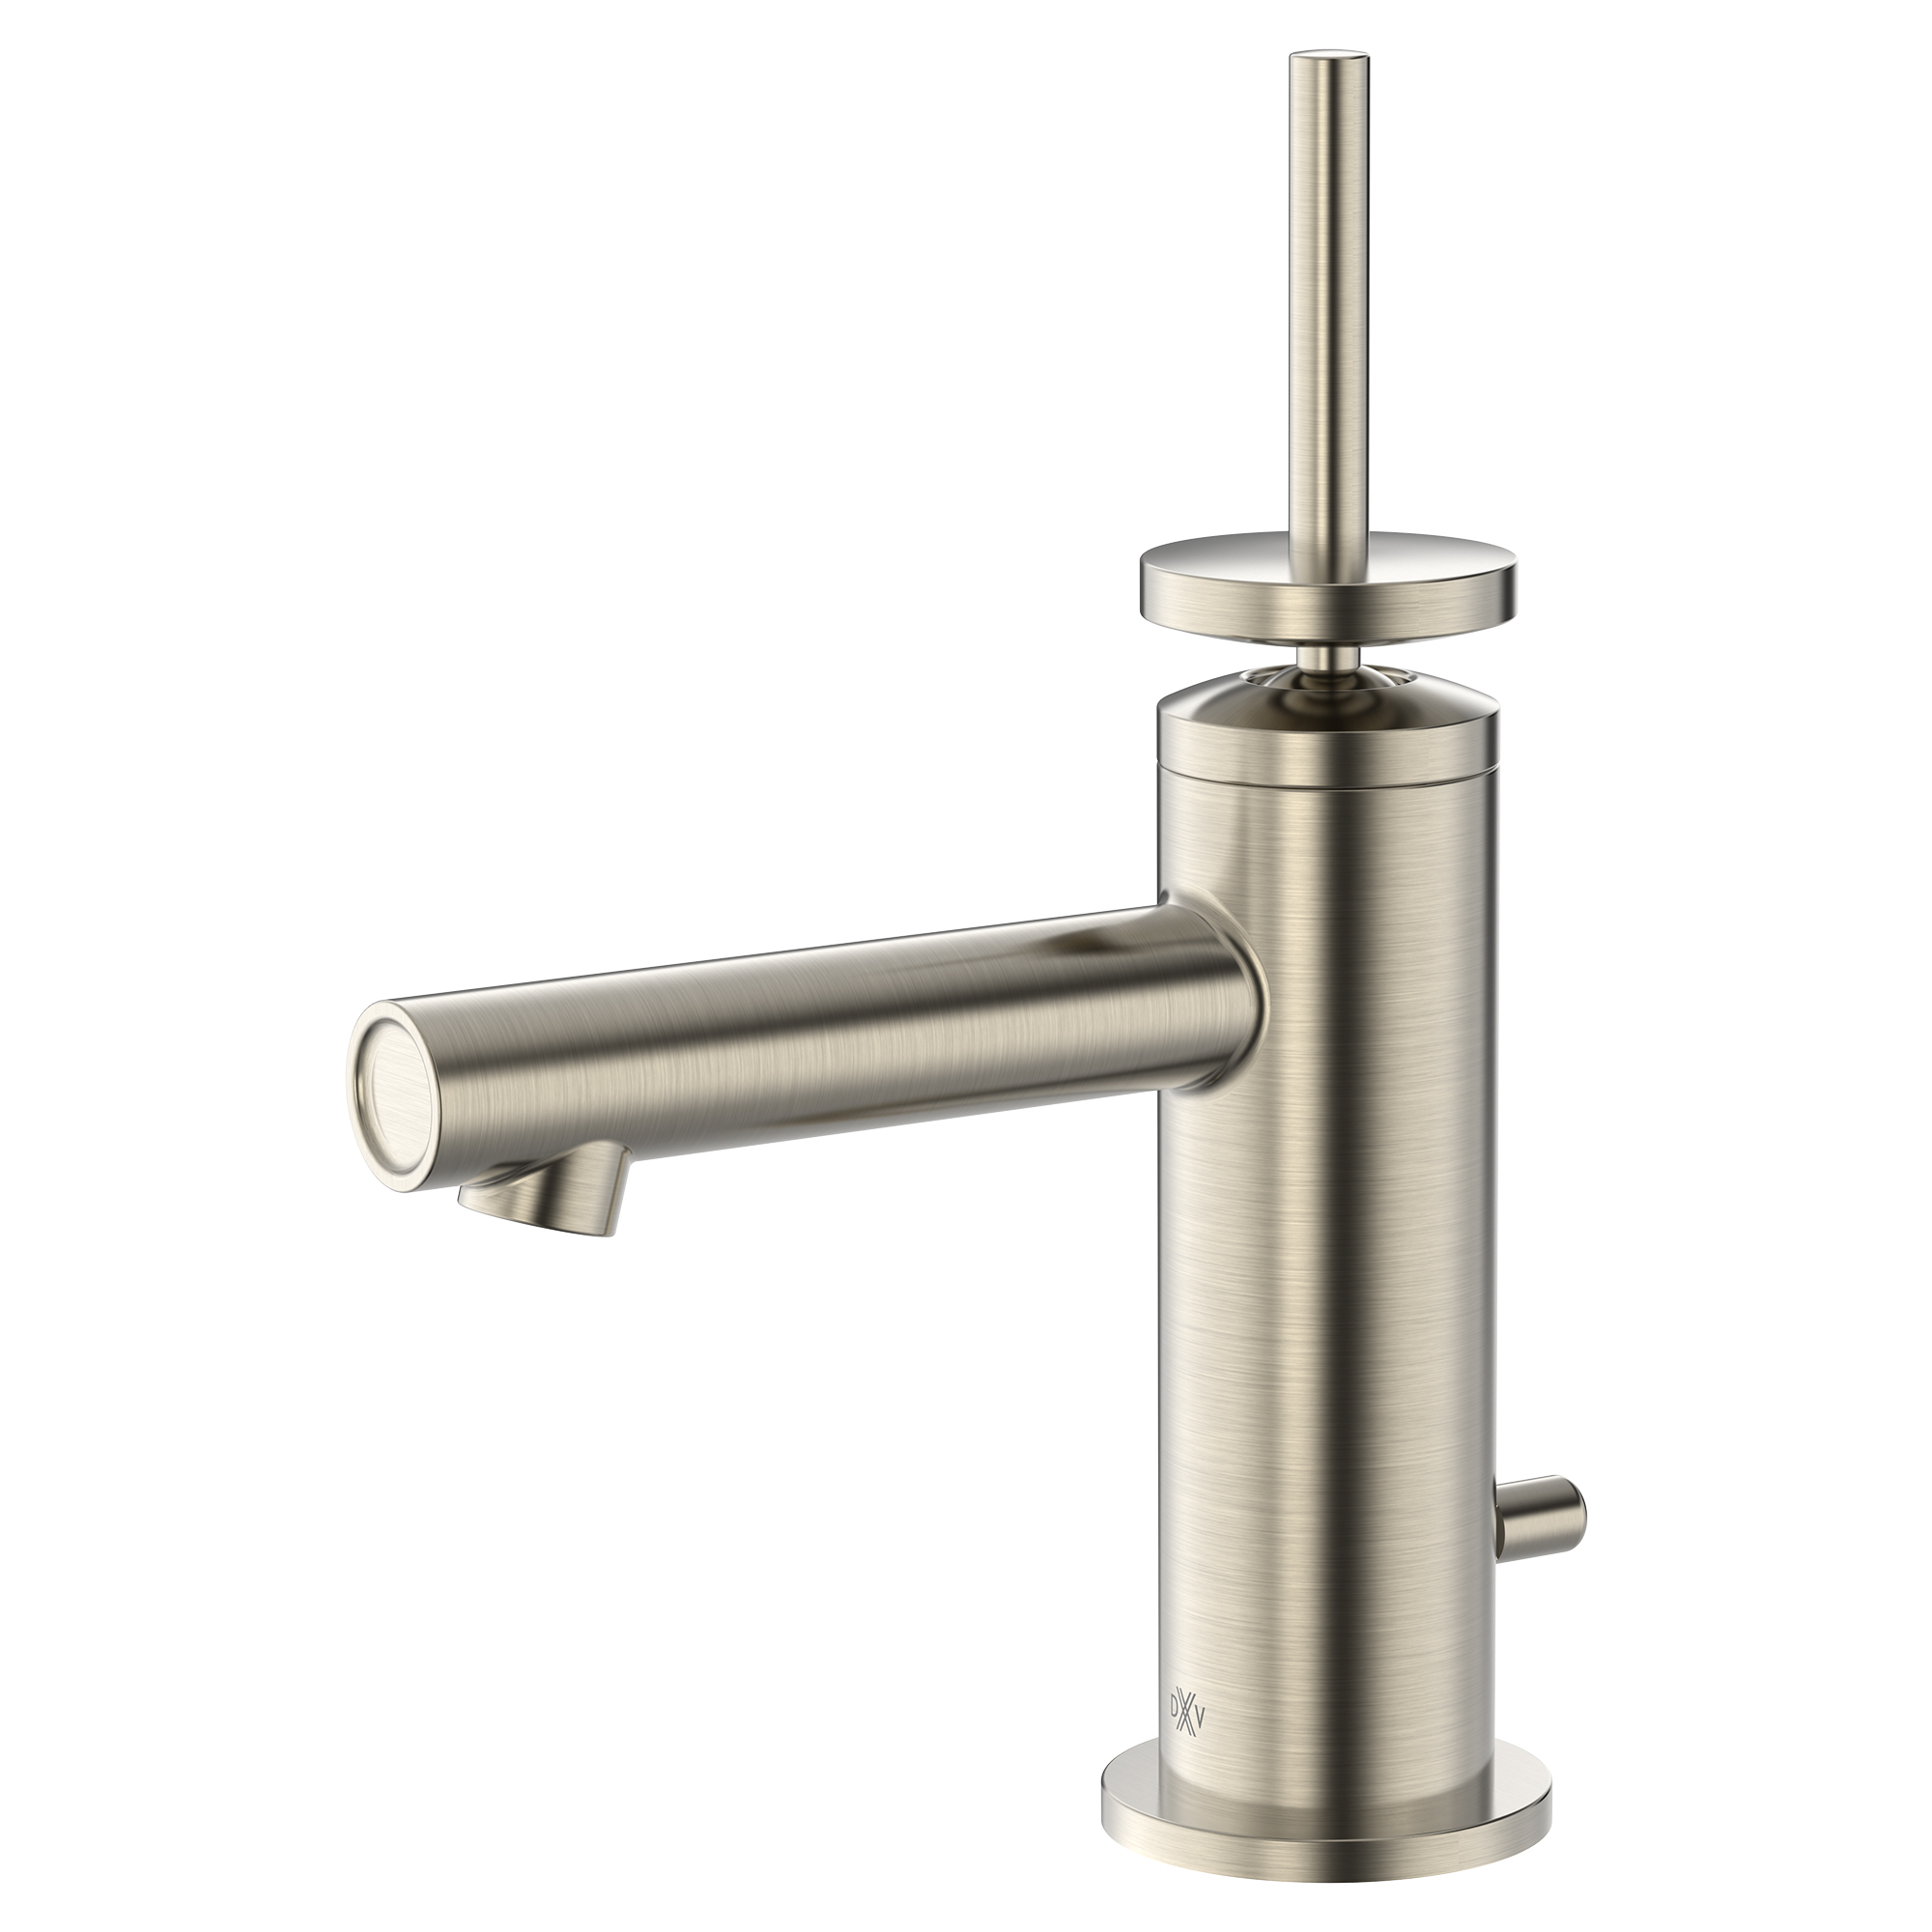 Percy® Single Handle Bathroom Faucet with Indicator Markings and Stem Handle